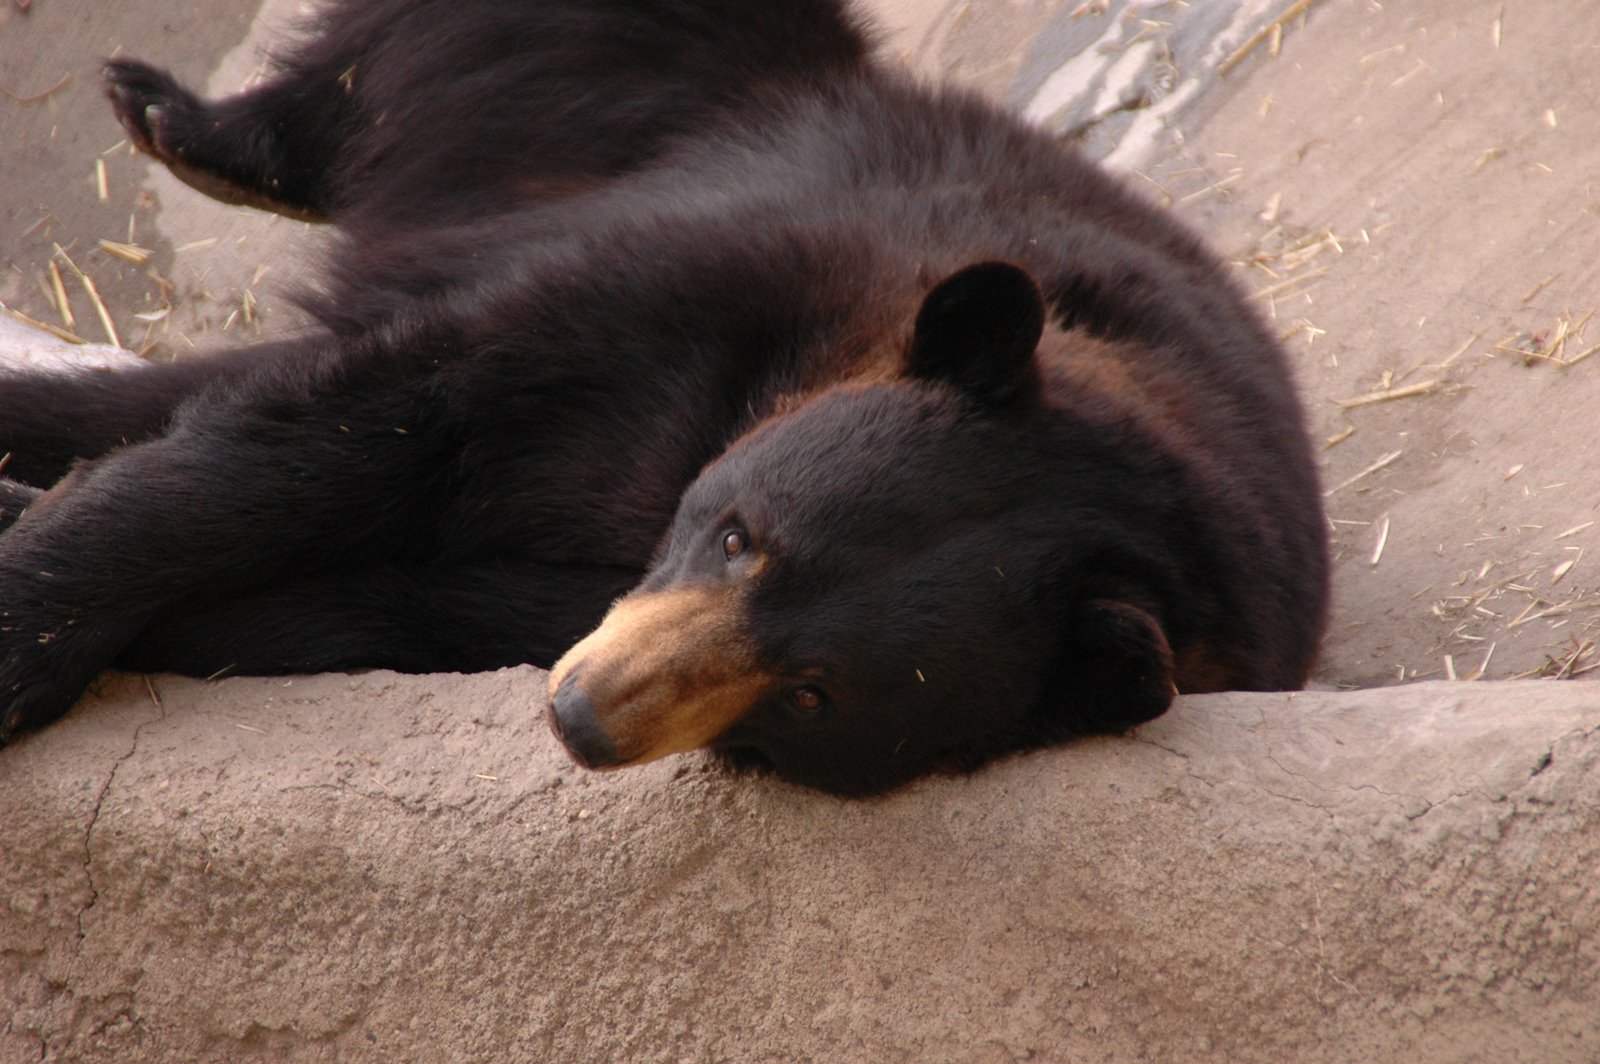 And now, to introduce, the entertaining black bear (a bit tuckered out now!)